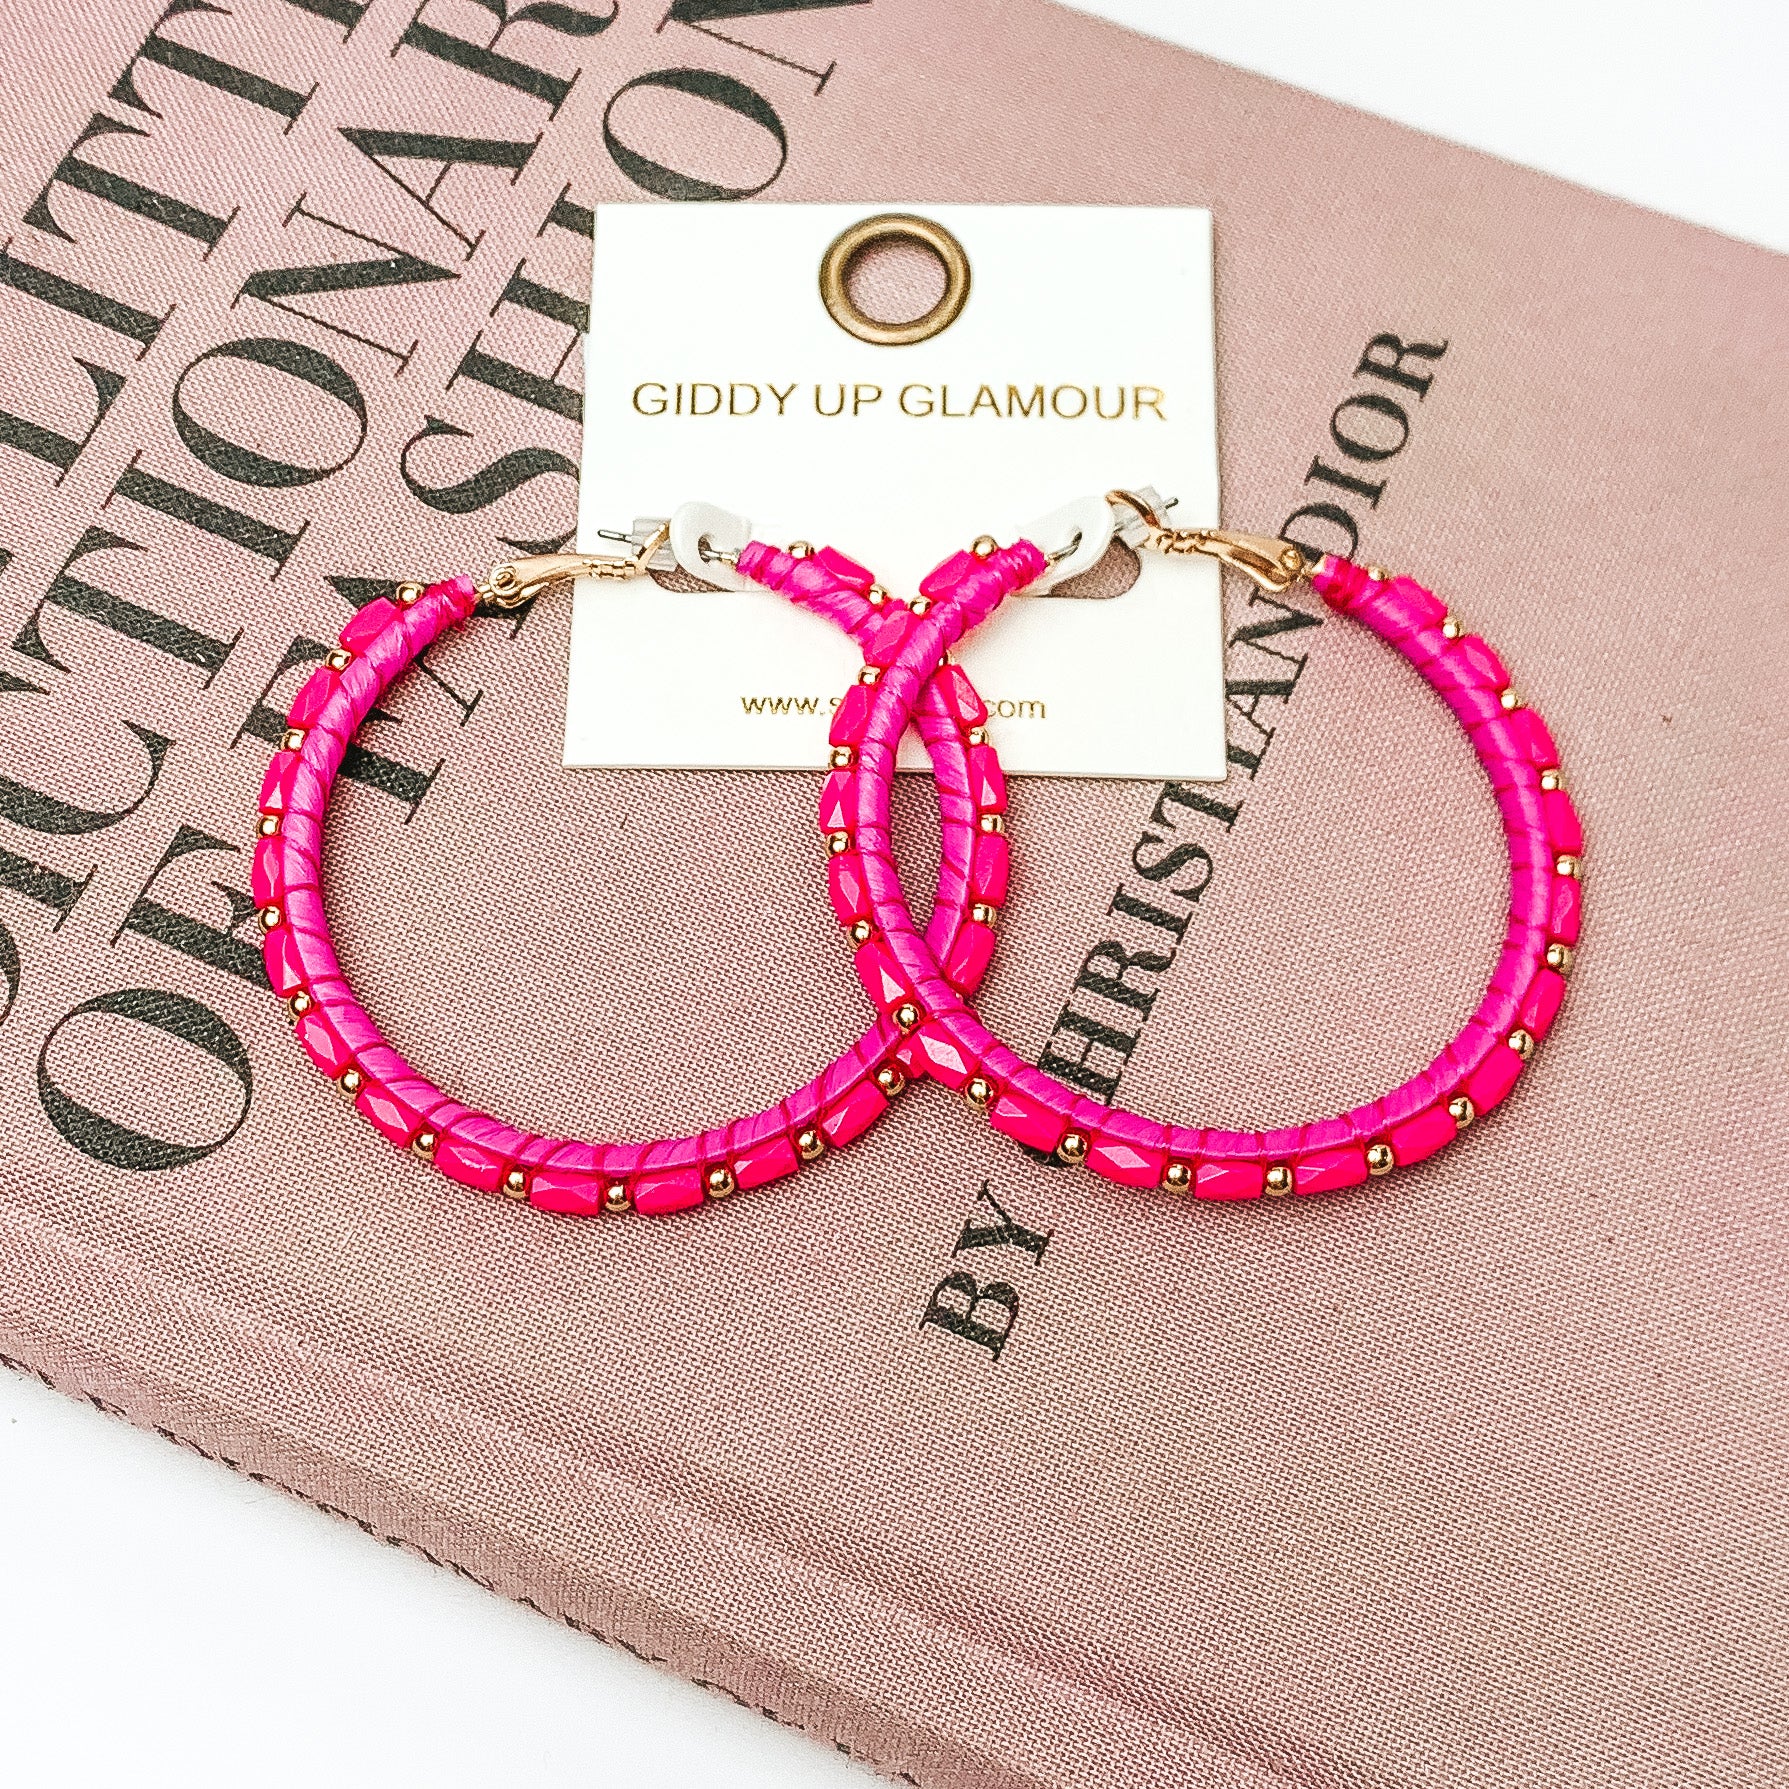 Pictured are circle beaded hoop earrings with gold spacers in hot pink. They are pictured with a pink fashion journal on a white background